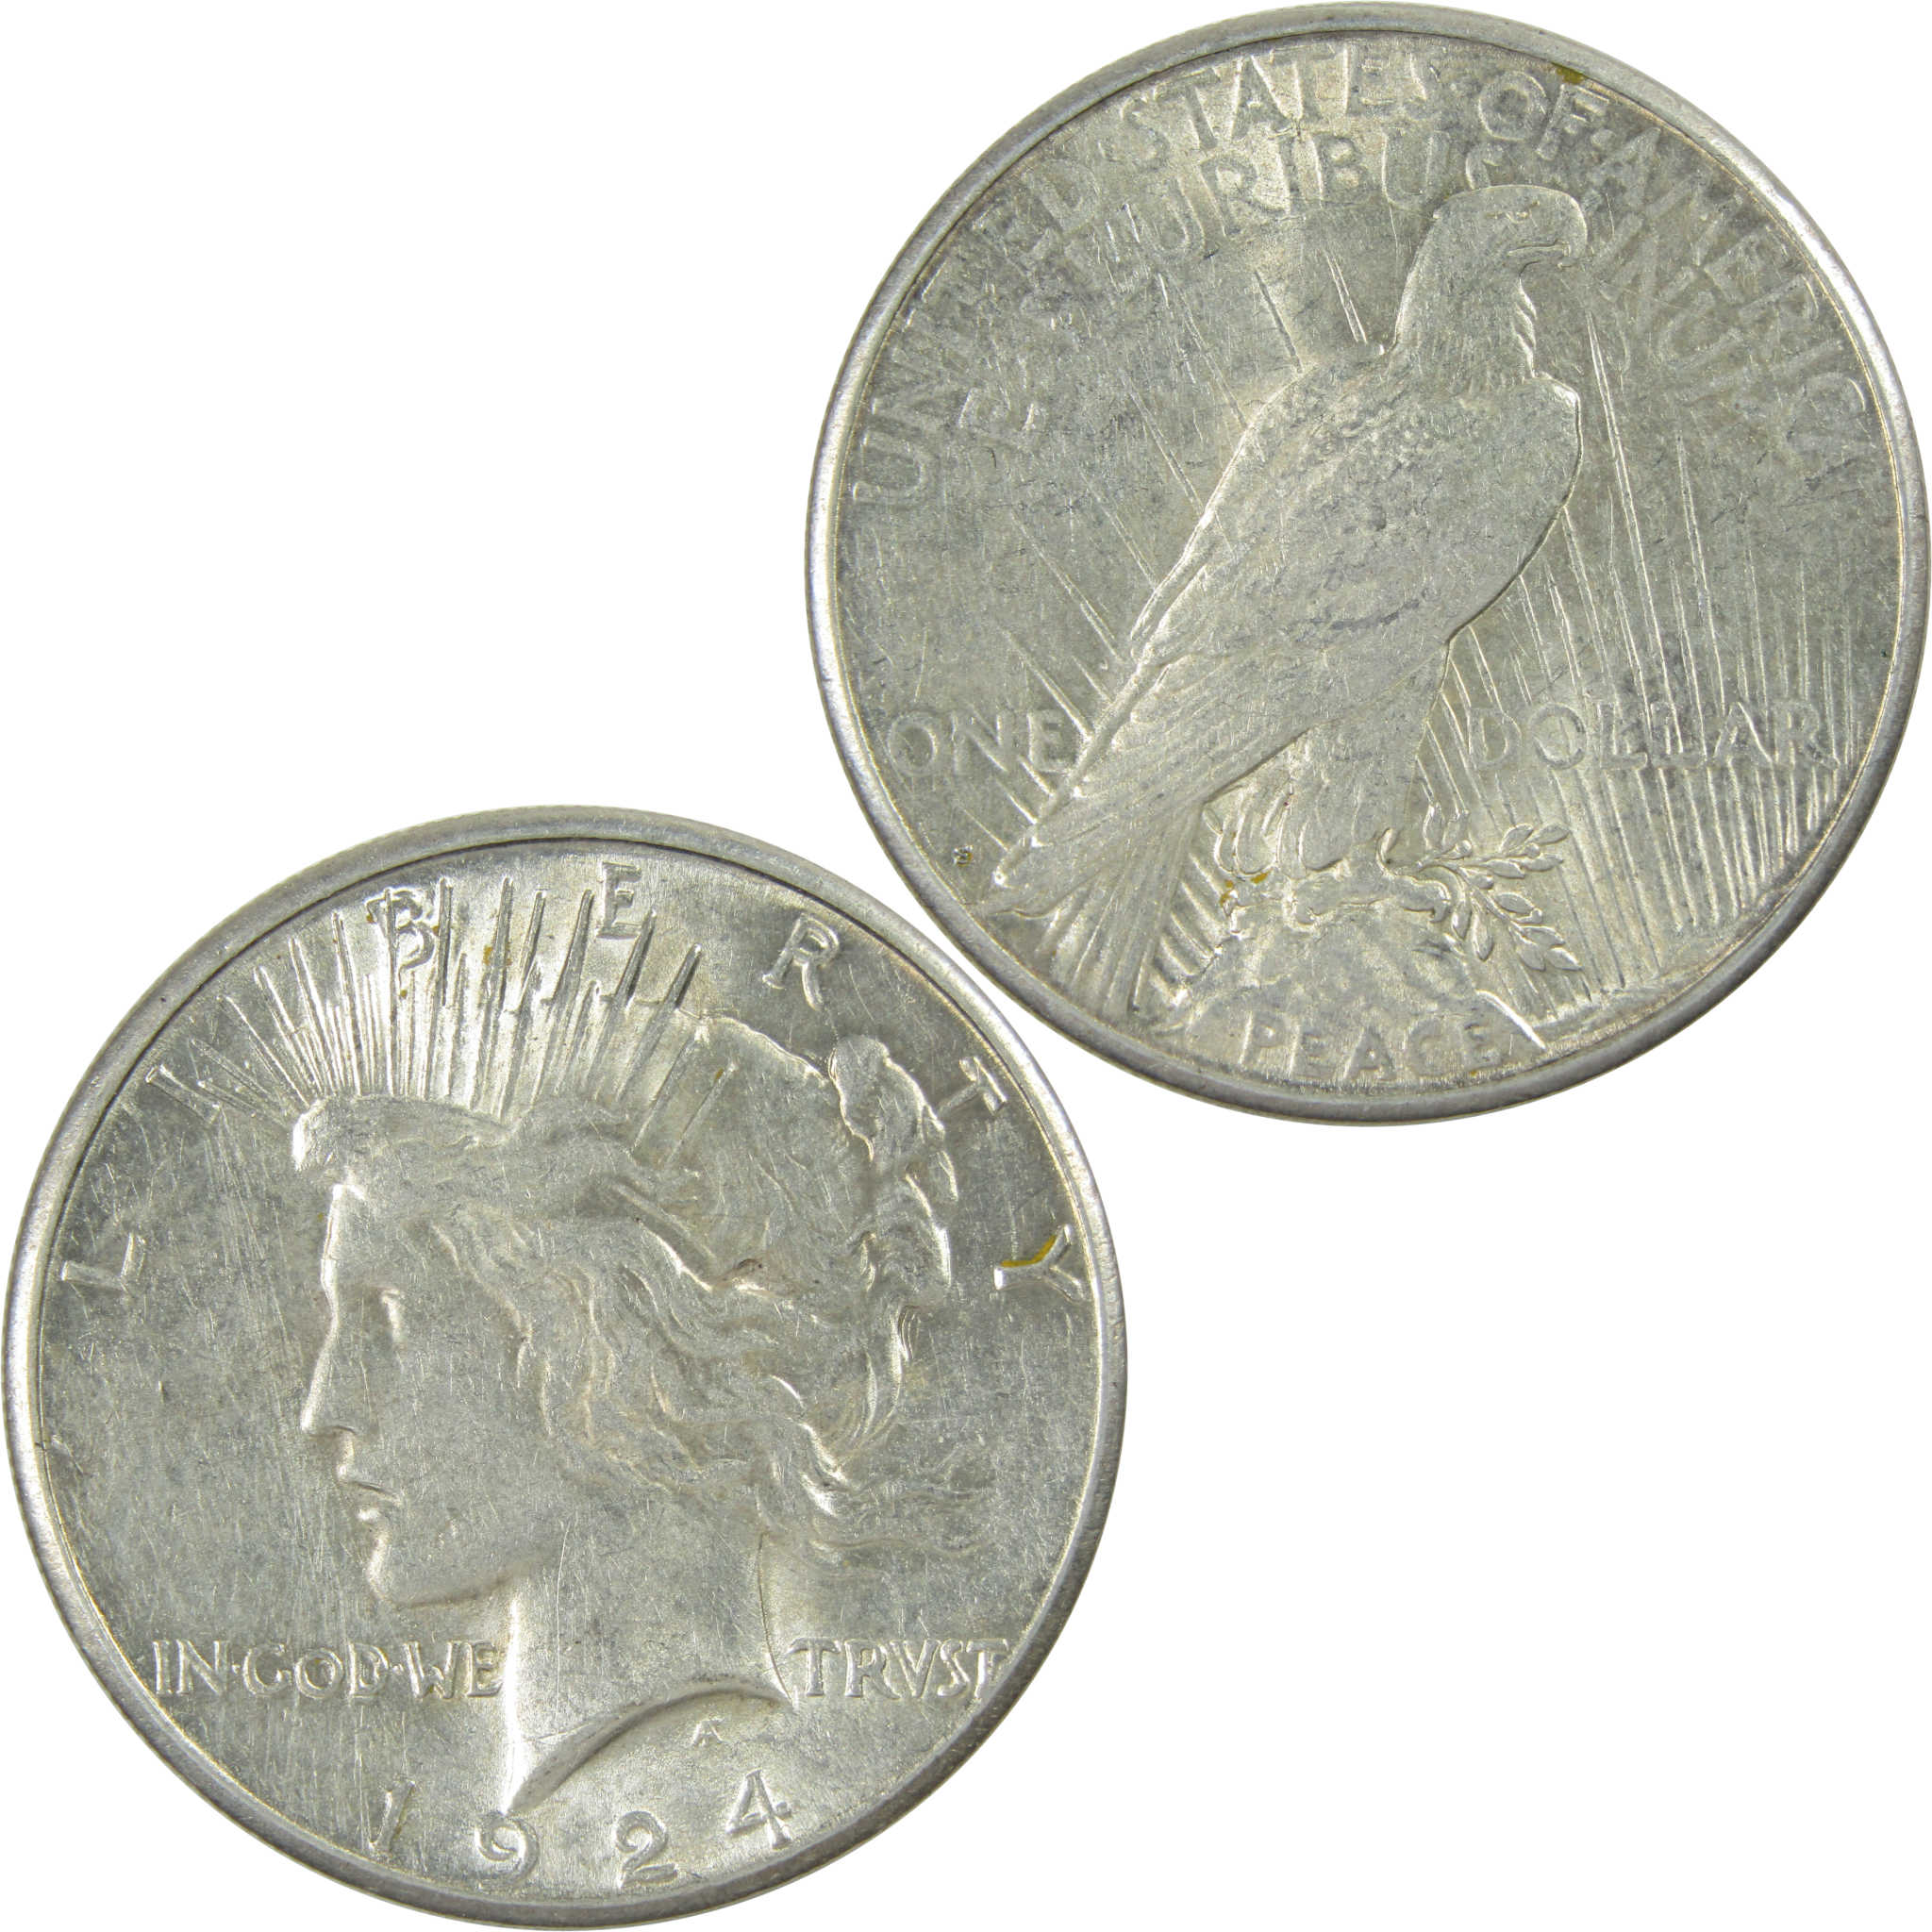 1924 S Peace Dollar AU About Uncirculated Silver $1 Coin SKU:I13684